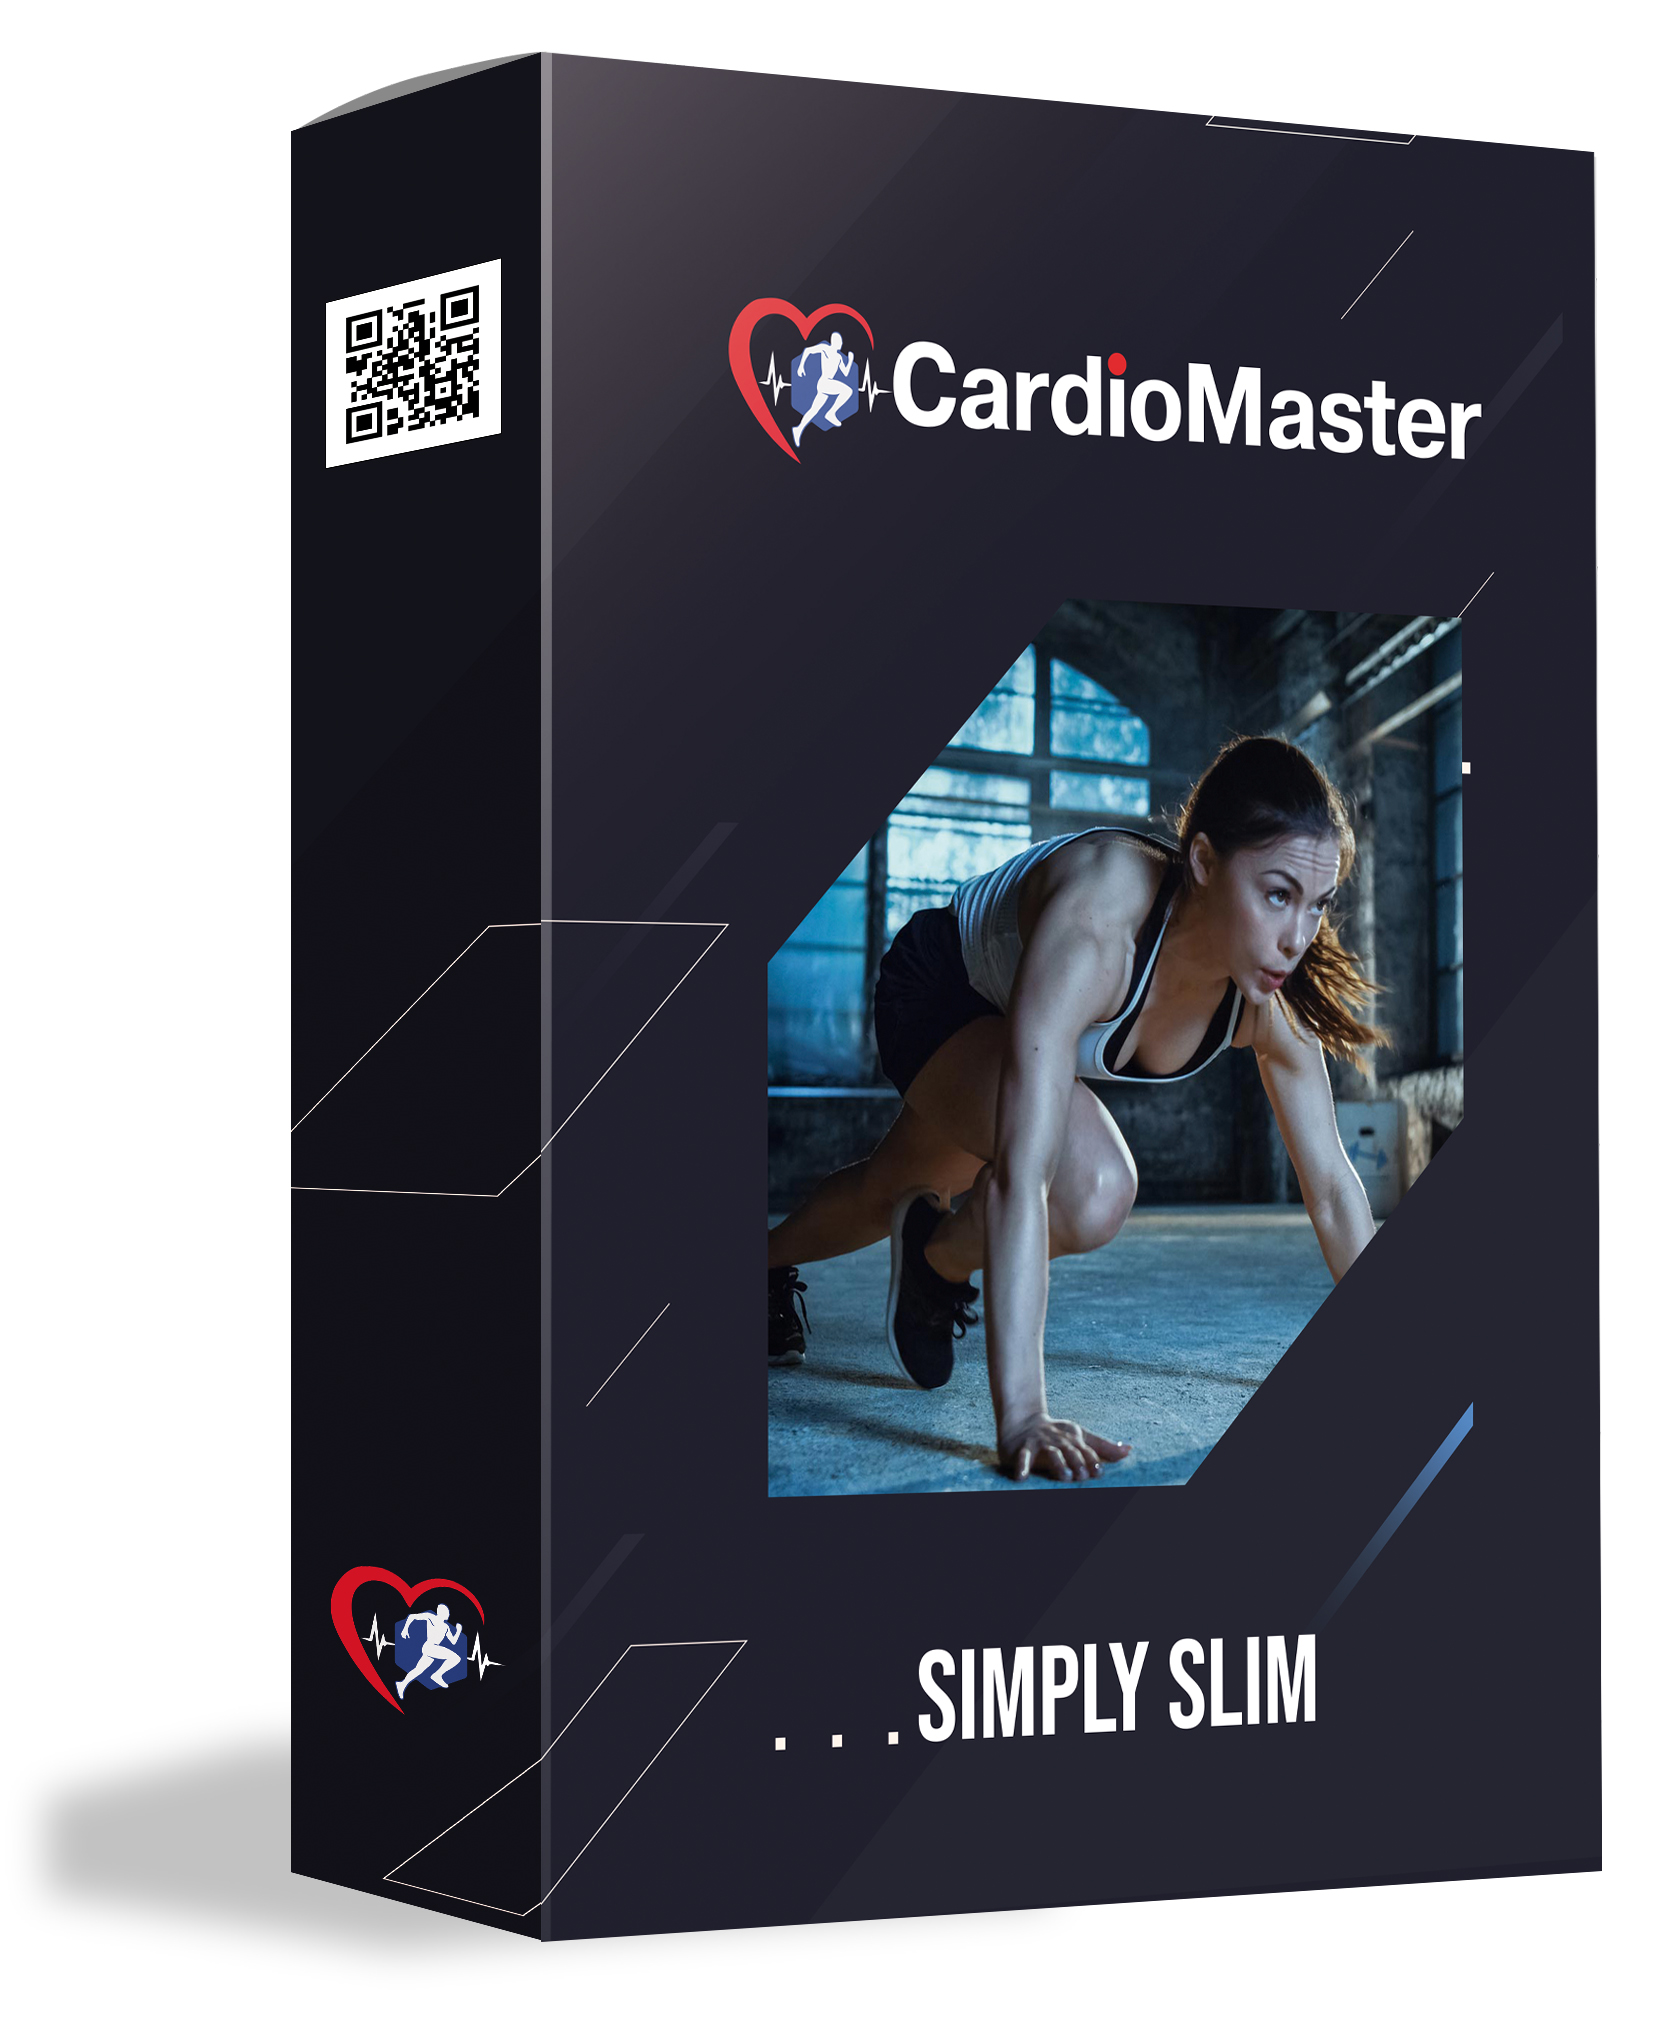 Simply Slim Can I Lose Weight with Diet Alone?